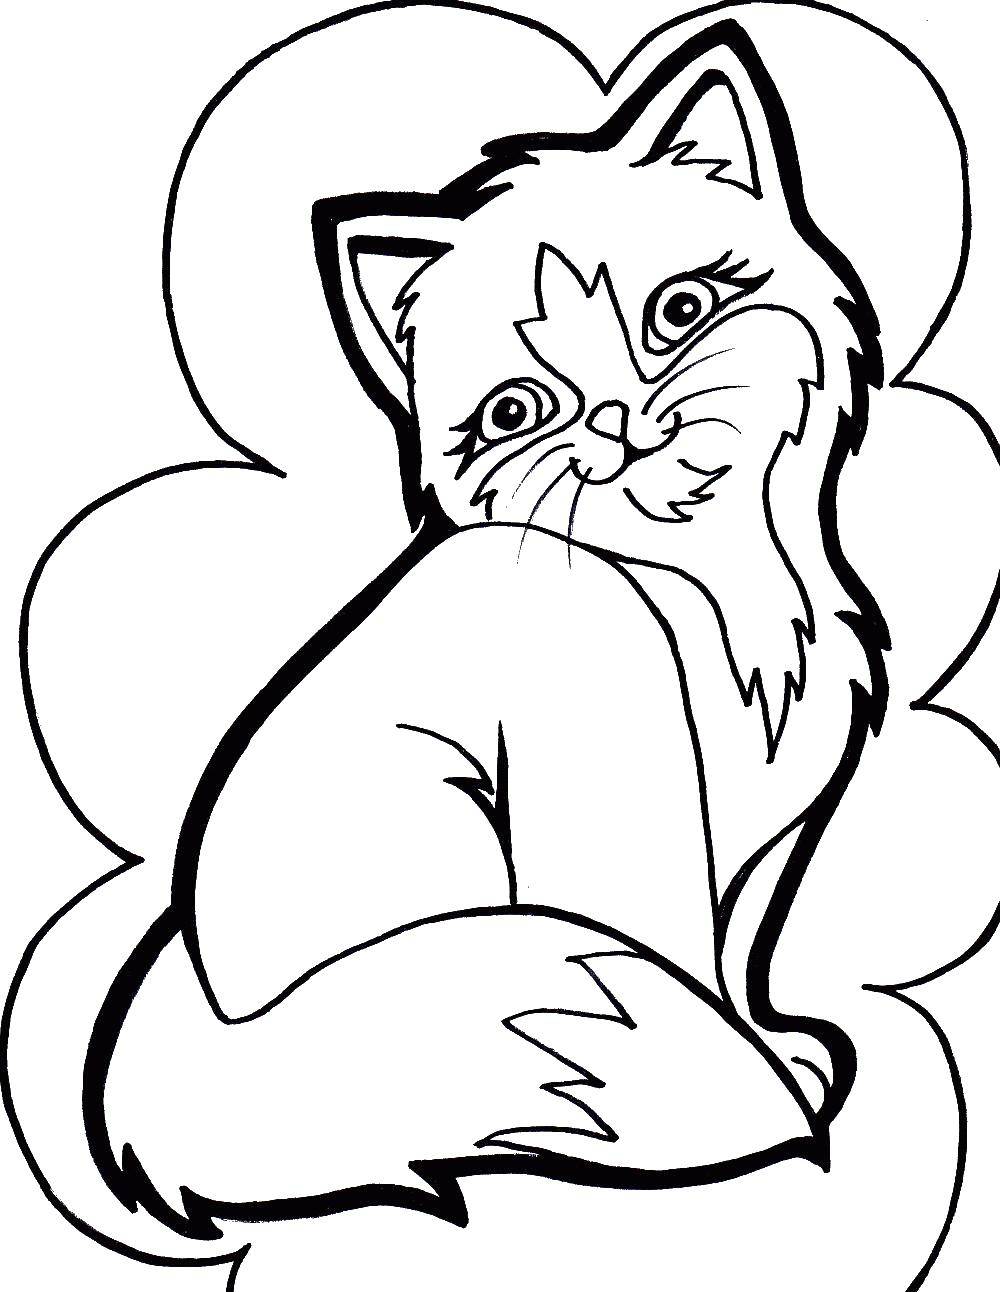 Coloring Cute kitty. Category Cats and kittens. Tags:  Animals, kitten.